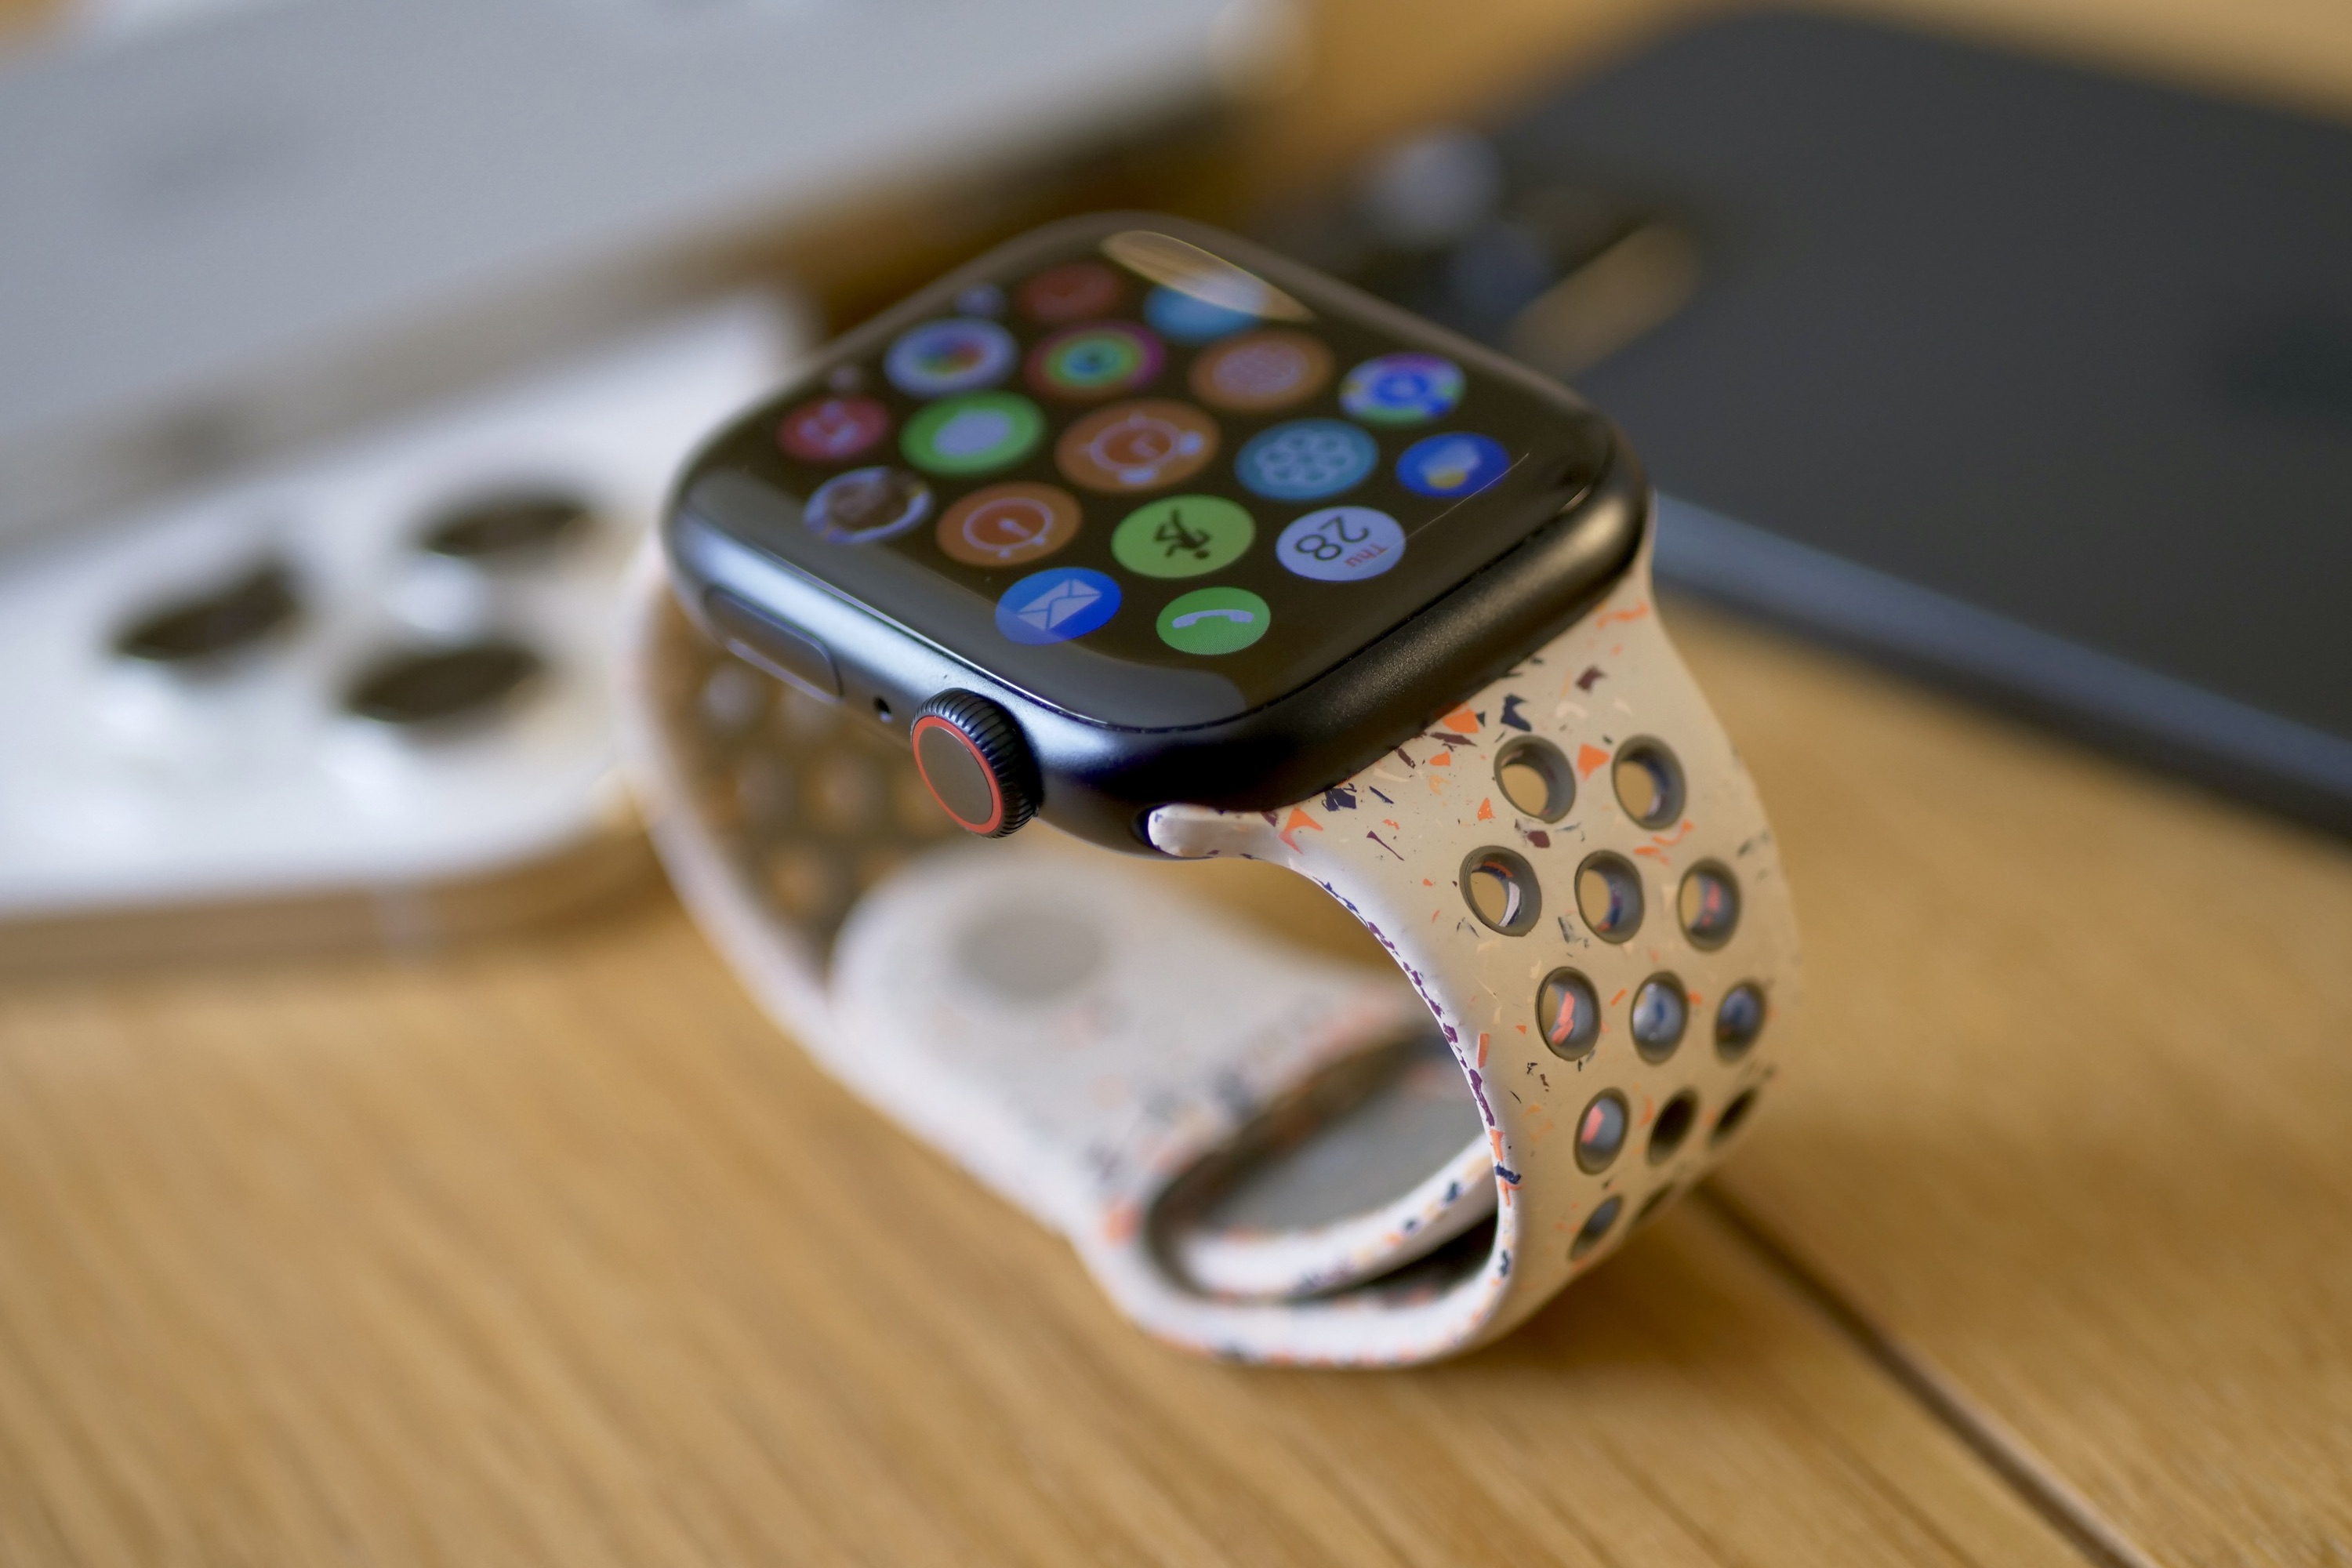 Apple Watch X: Apple working on Watch X model featuring new design, blood  pressure monitor, upgraded display: Report - The Economic Times